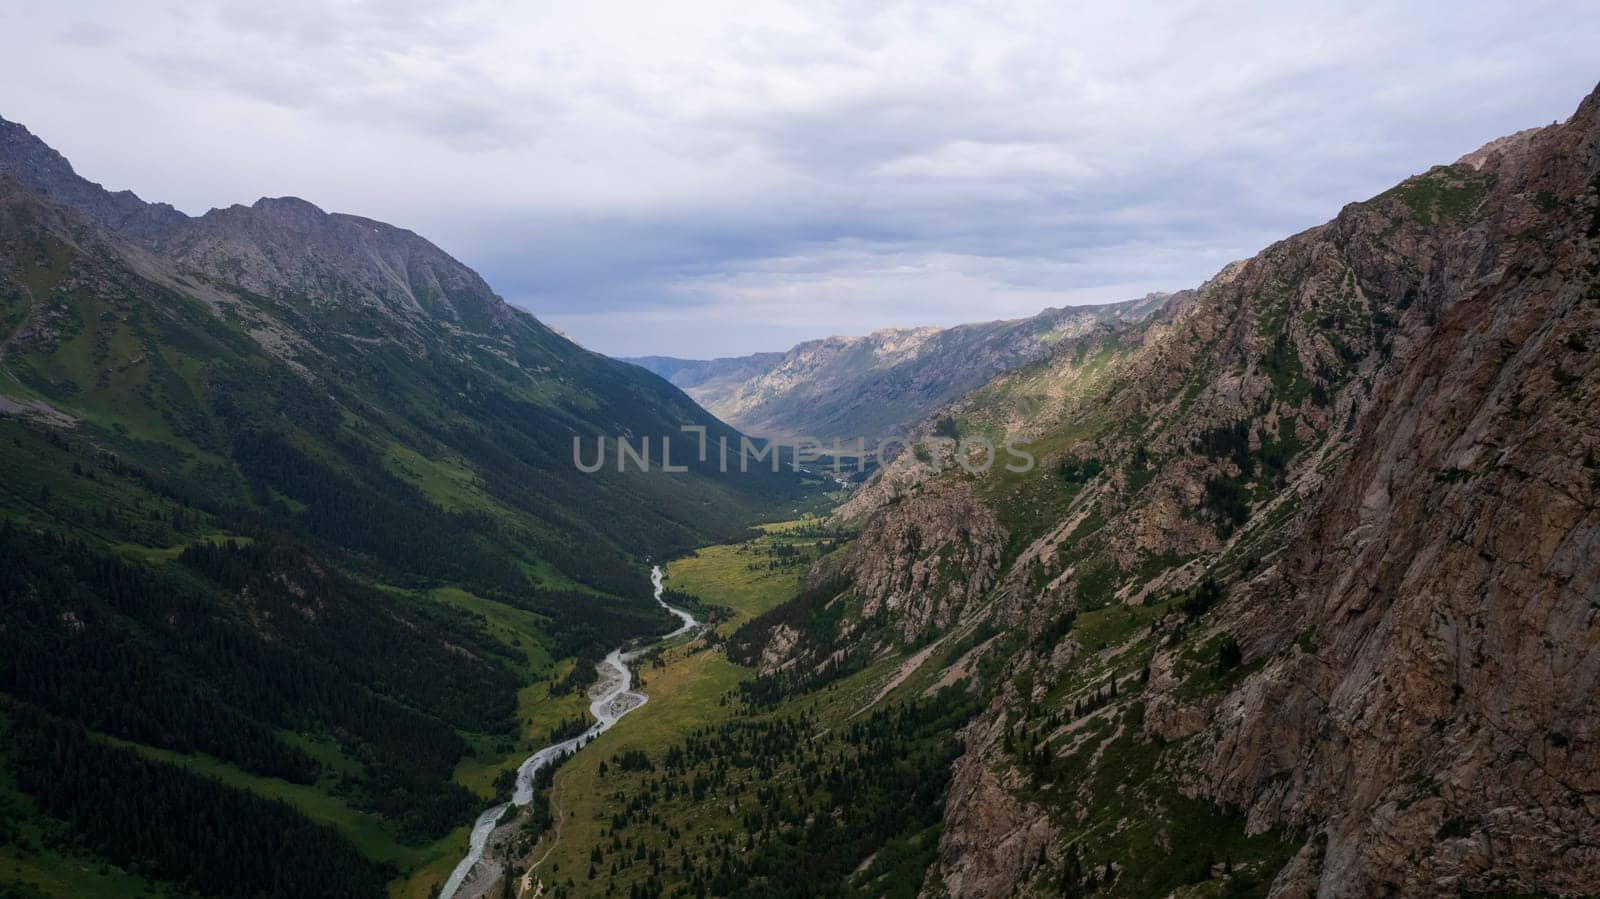 Drone view of a green gorge with high rocky cliffs by Passcal